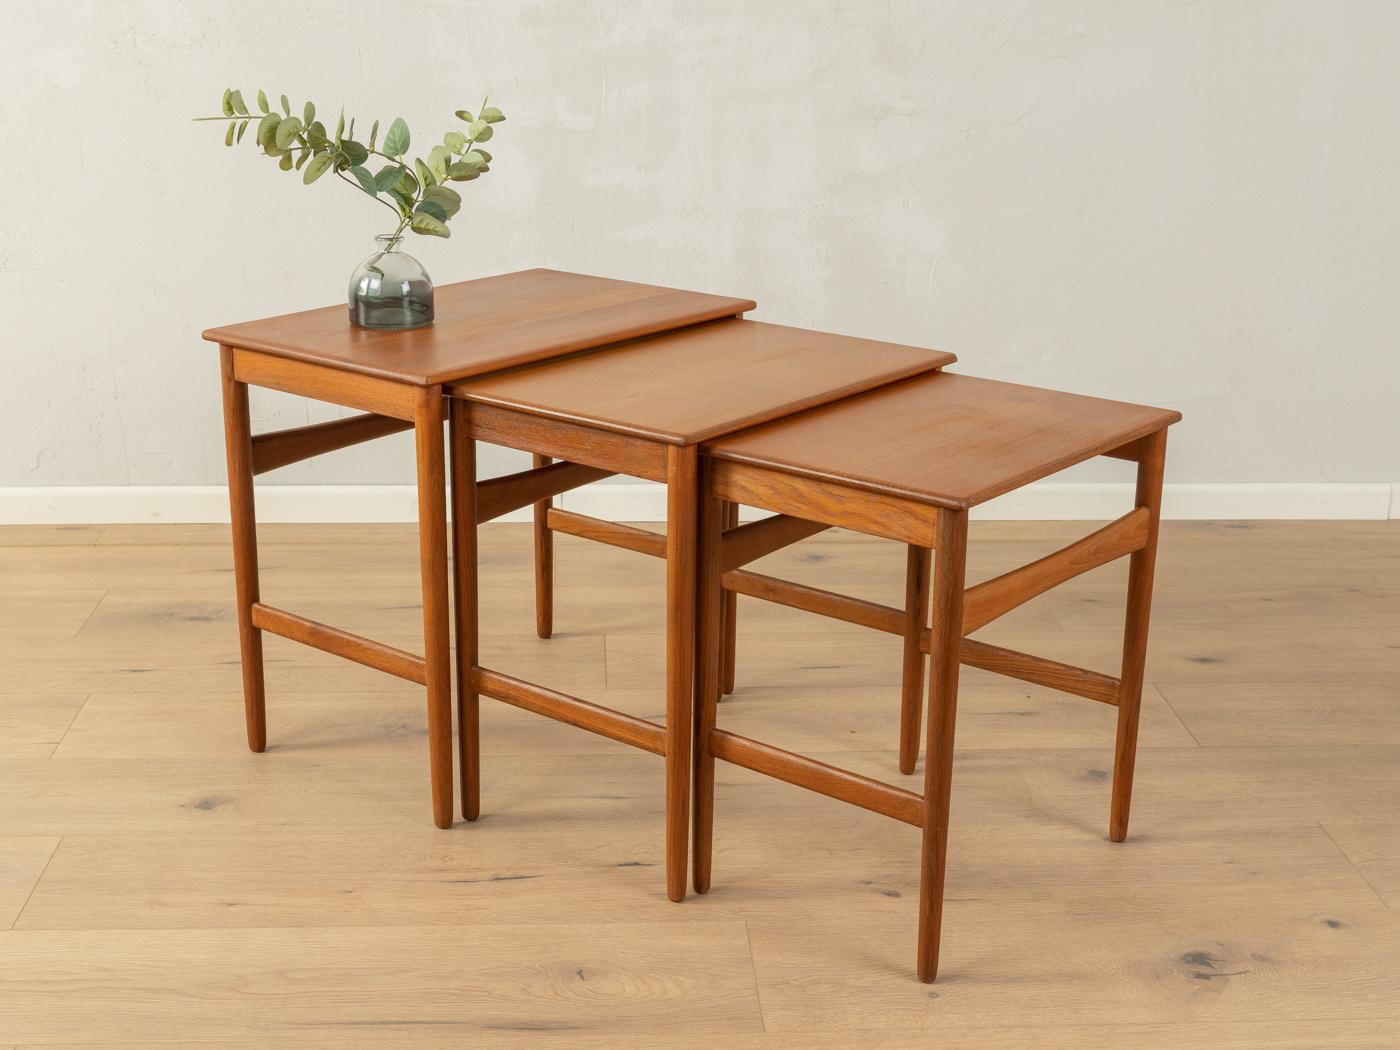 Classic nesting tables from the 1960s by Hans J. Wegner for Andreas Tuck. Veneered table top with solid wood edge and solid wood frame in teak.

Width 52 cm, height 48 cm, depth 34 cm
Width 46 cm, height 46 cm, depth 32 cm
Width 40 cm, height 44